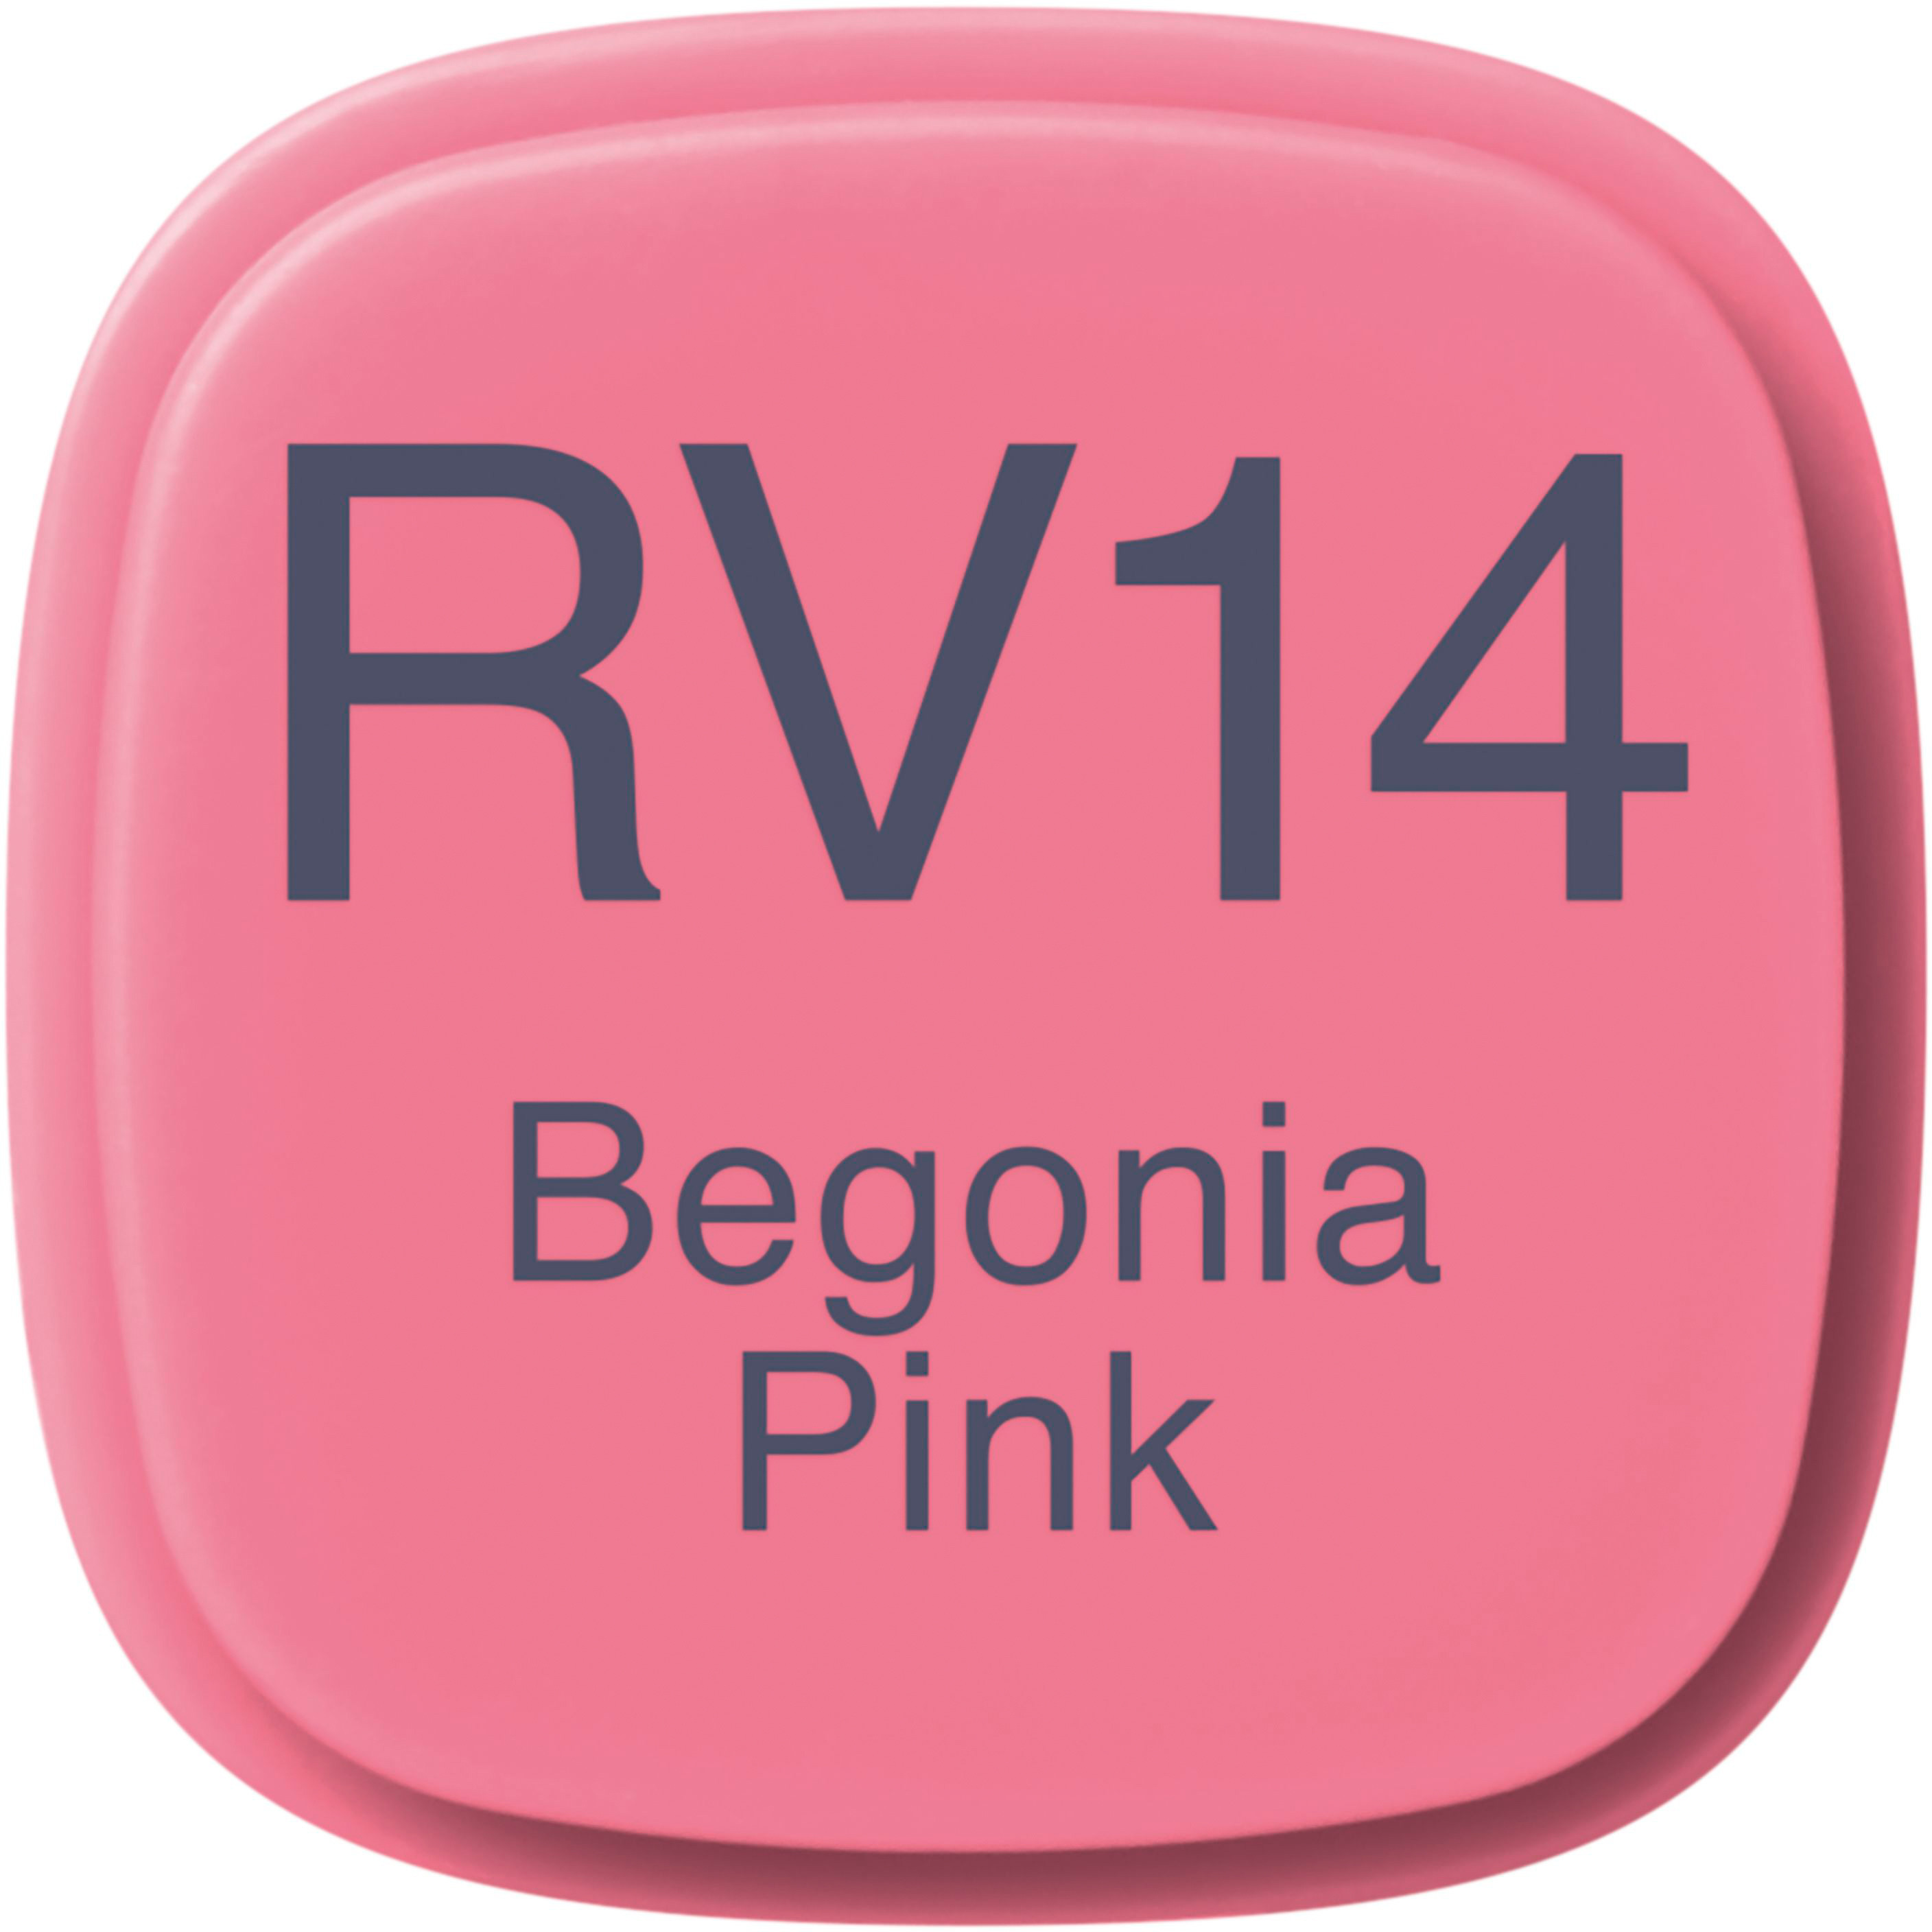 COPIC Marker Classic 20075128 RV14 - Begonia Pink